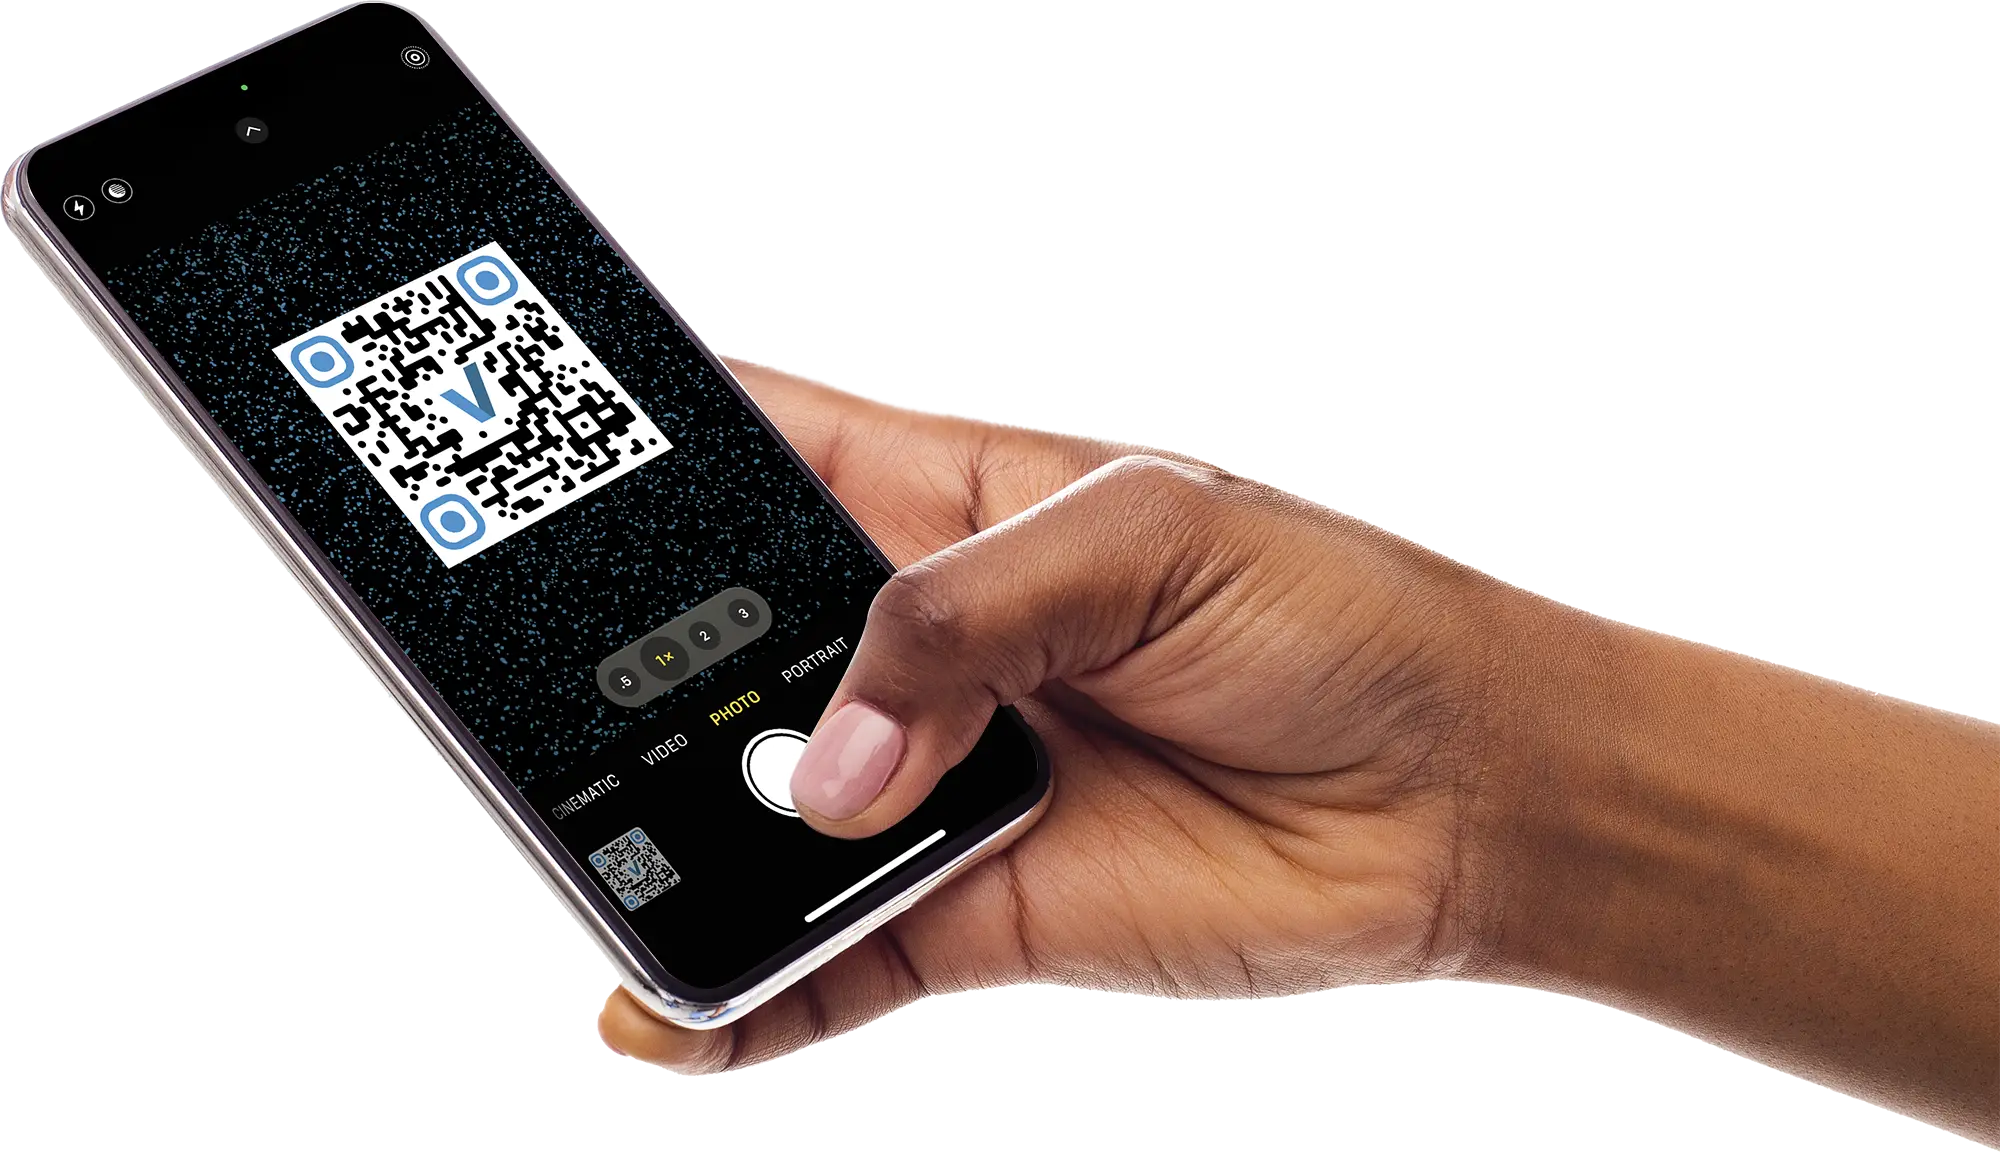 hand holding phone taking picture of qr code